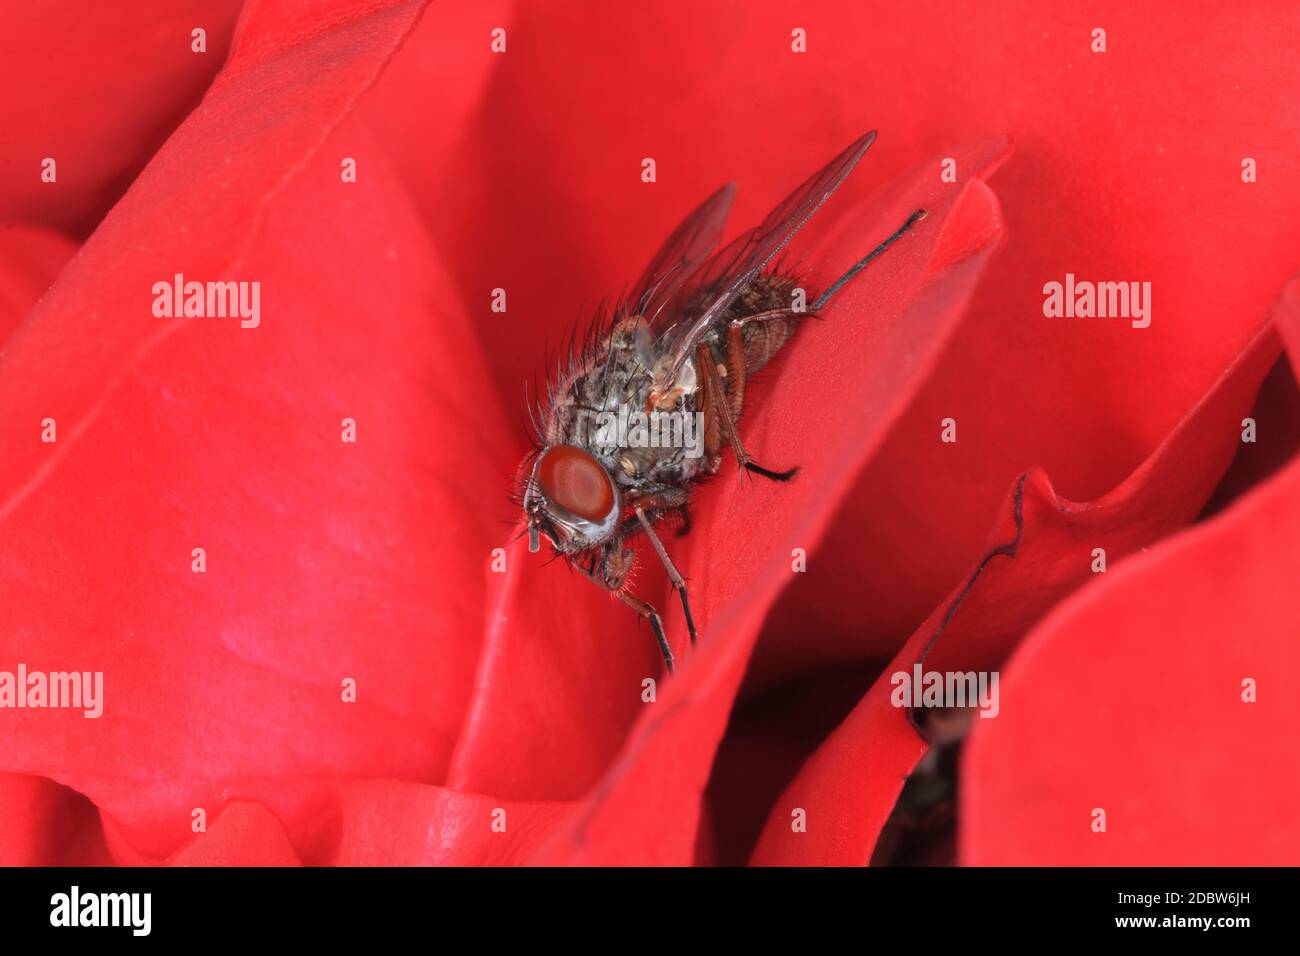 Grey Tachinid fly sitting in a red rose blossom Stock Photo